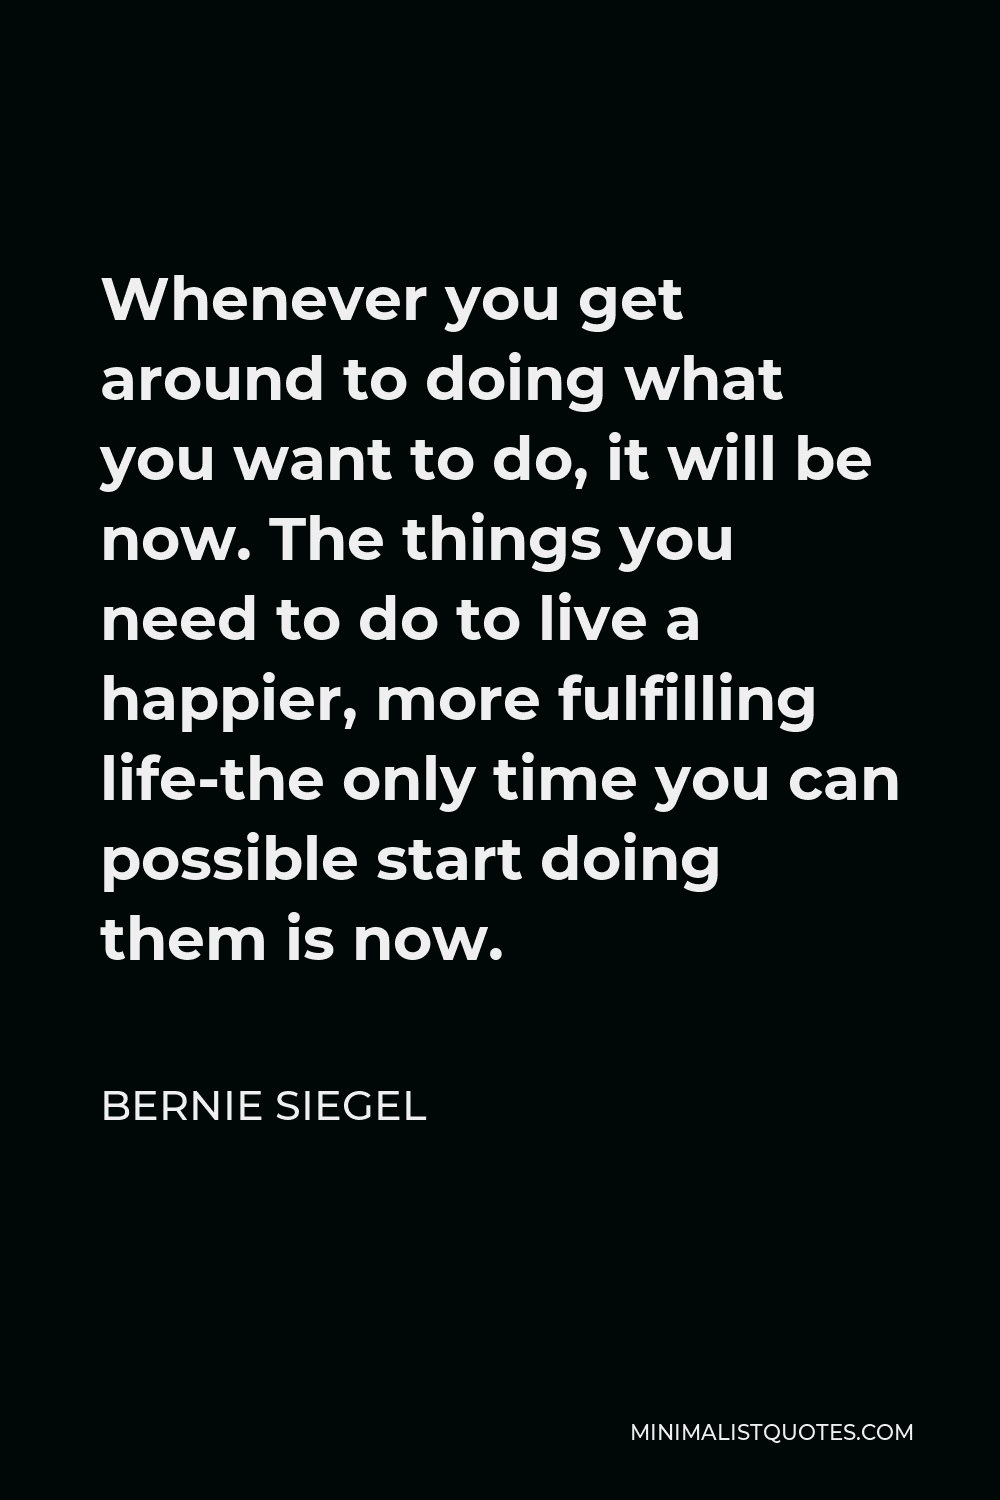 Bernie Siegel Quote - Whenever you get around to doing what you want to do, it will be now. The things you need to do to live a happier, more fulfilling life-the only time you can possible start doing them is now.